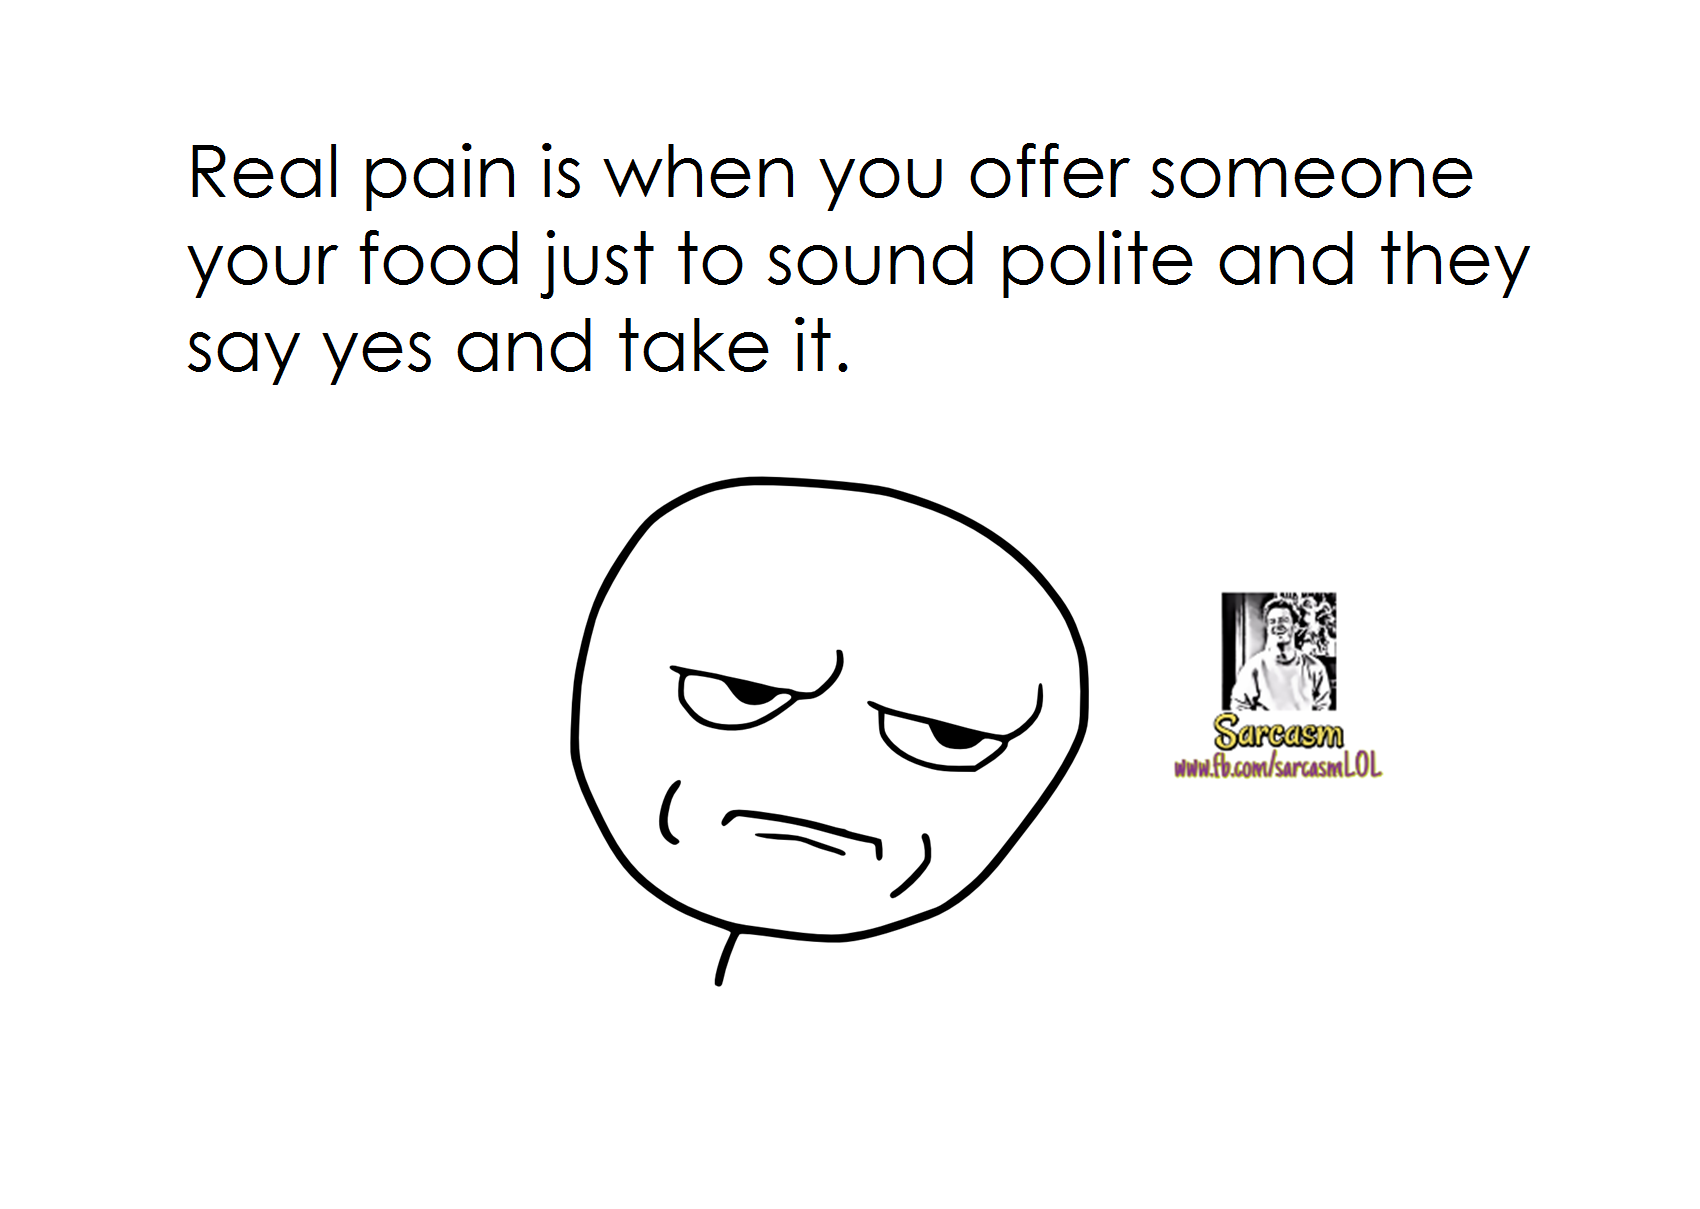 Real Pain is when you offer someone your food just to sound polite and they yes and take it.